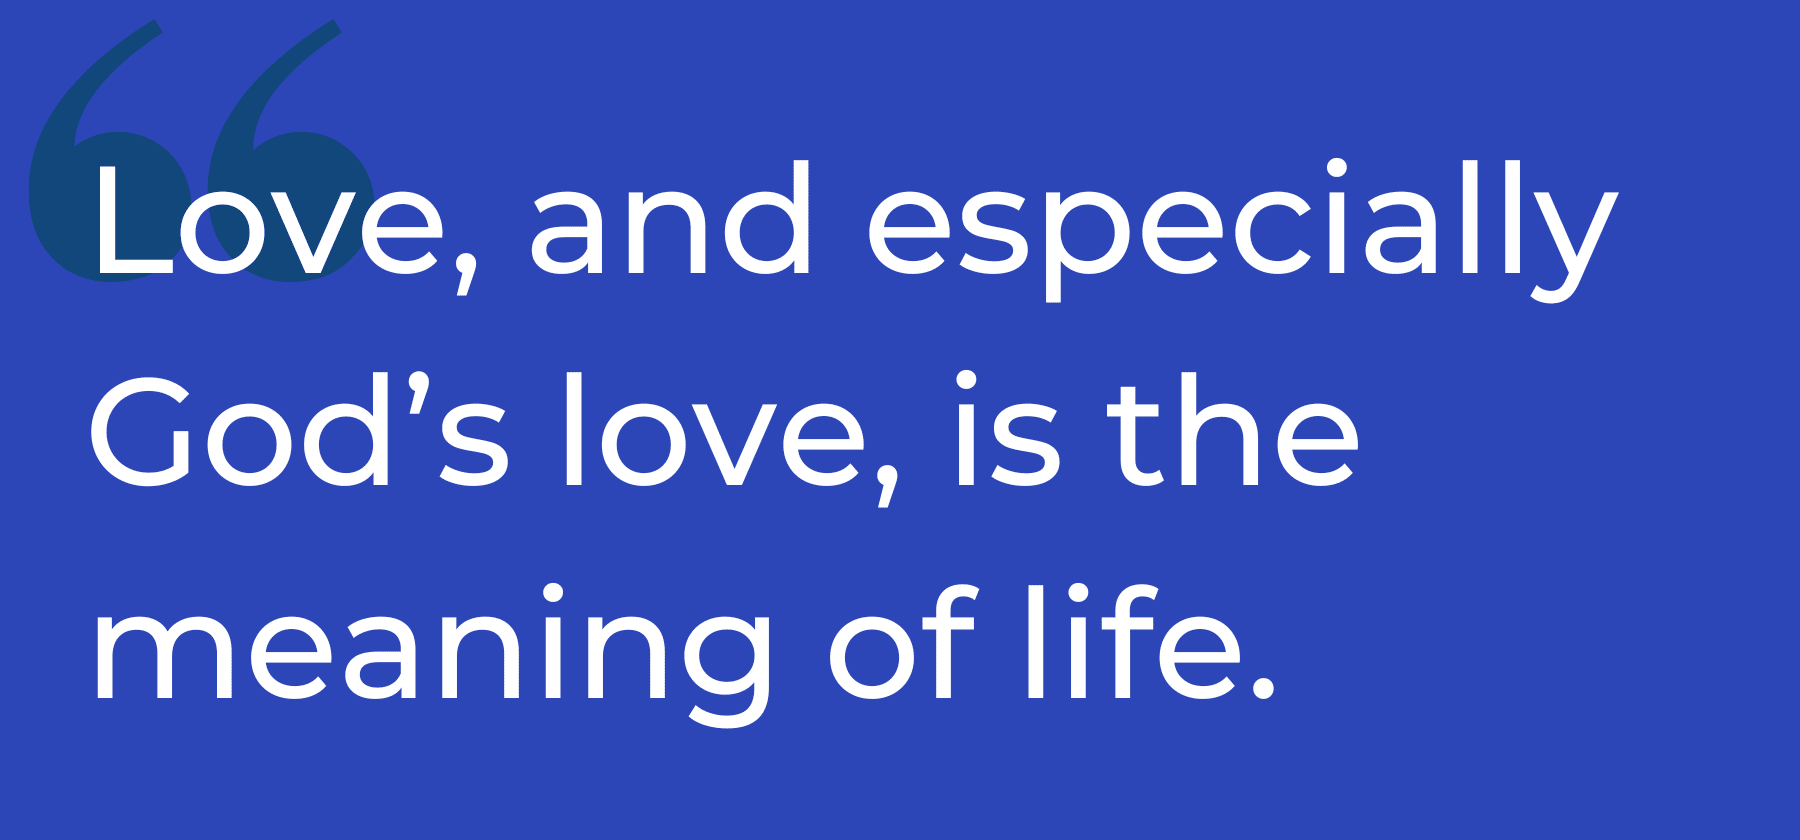 quotation on love as the meaning of life